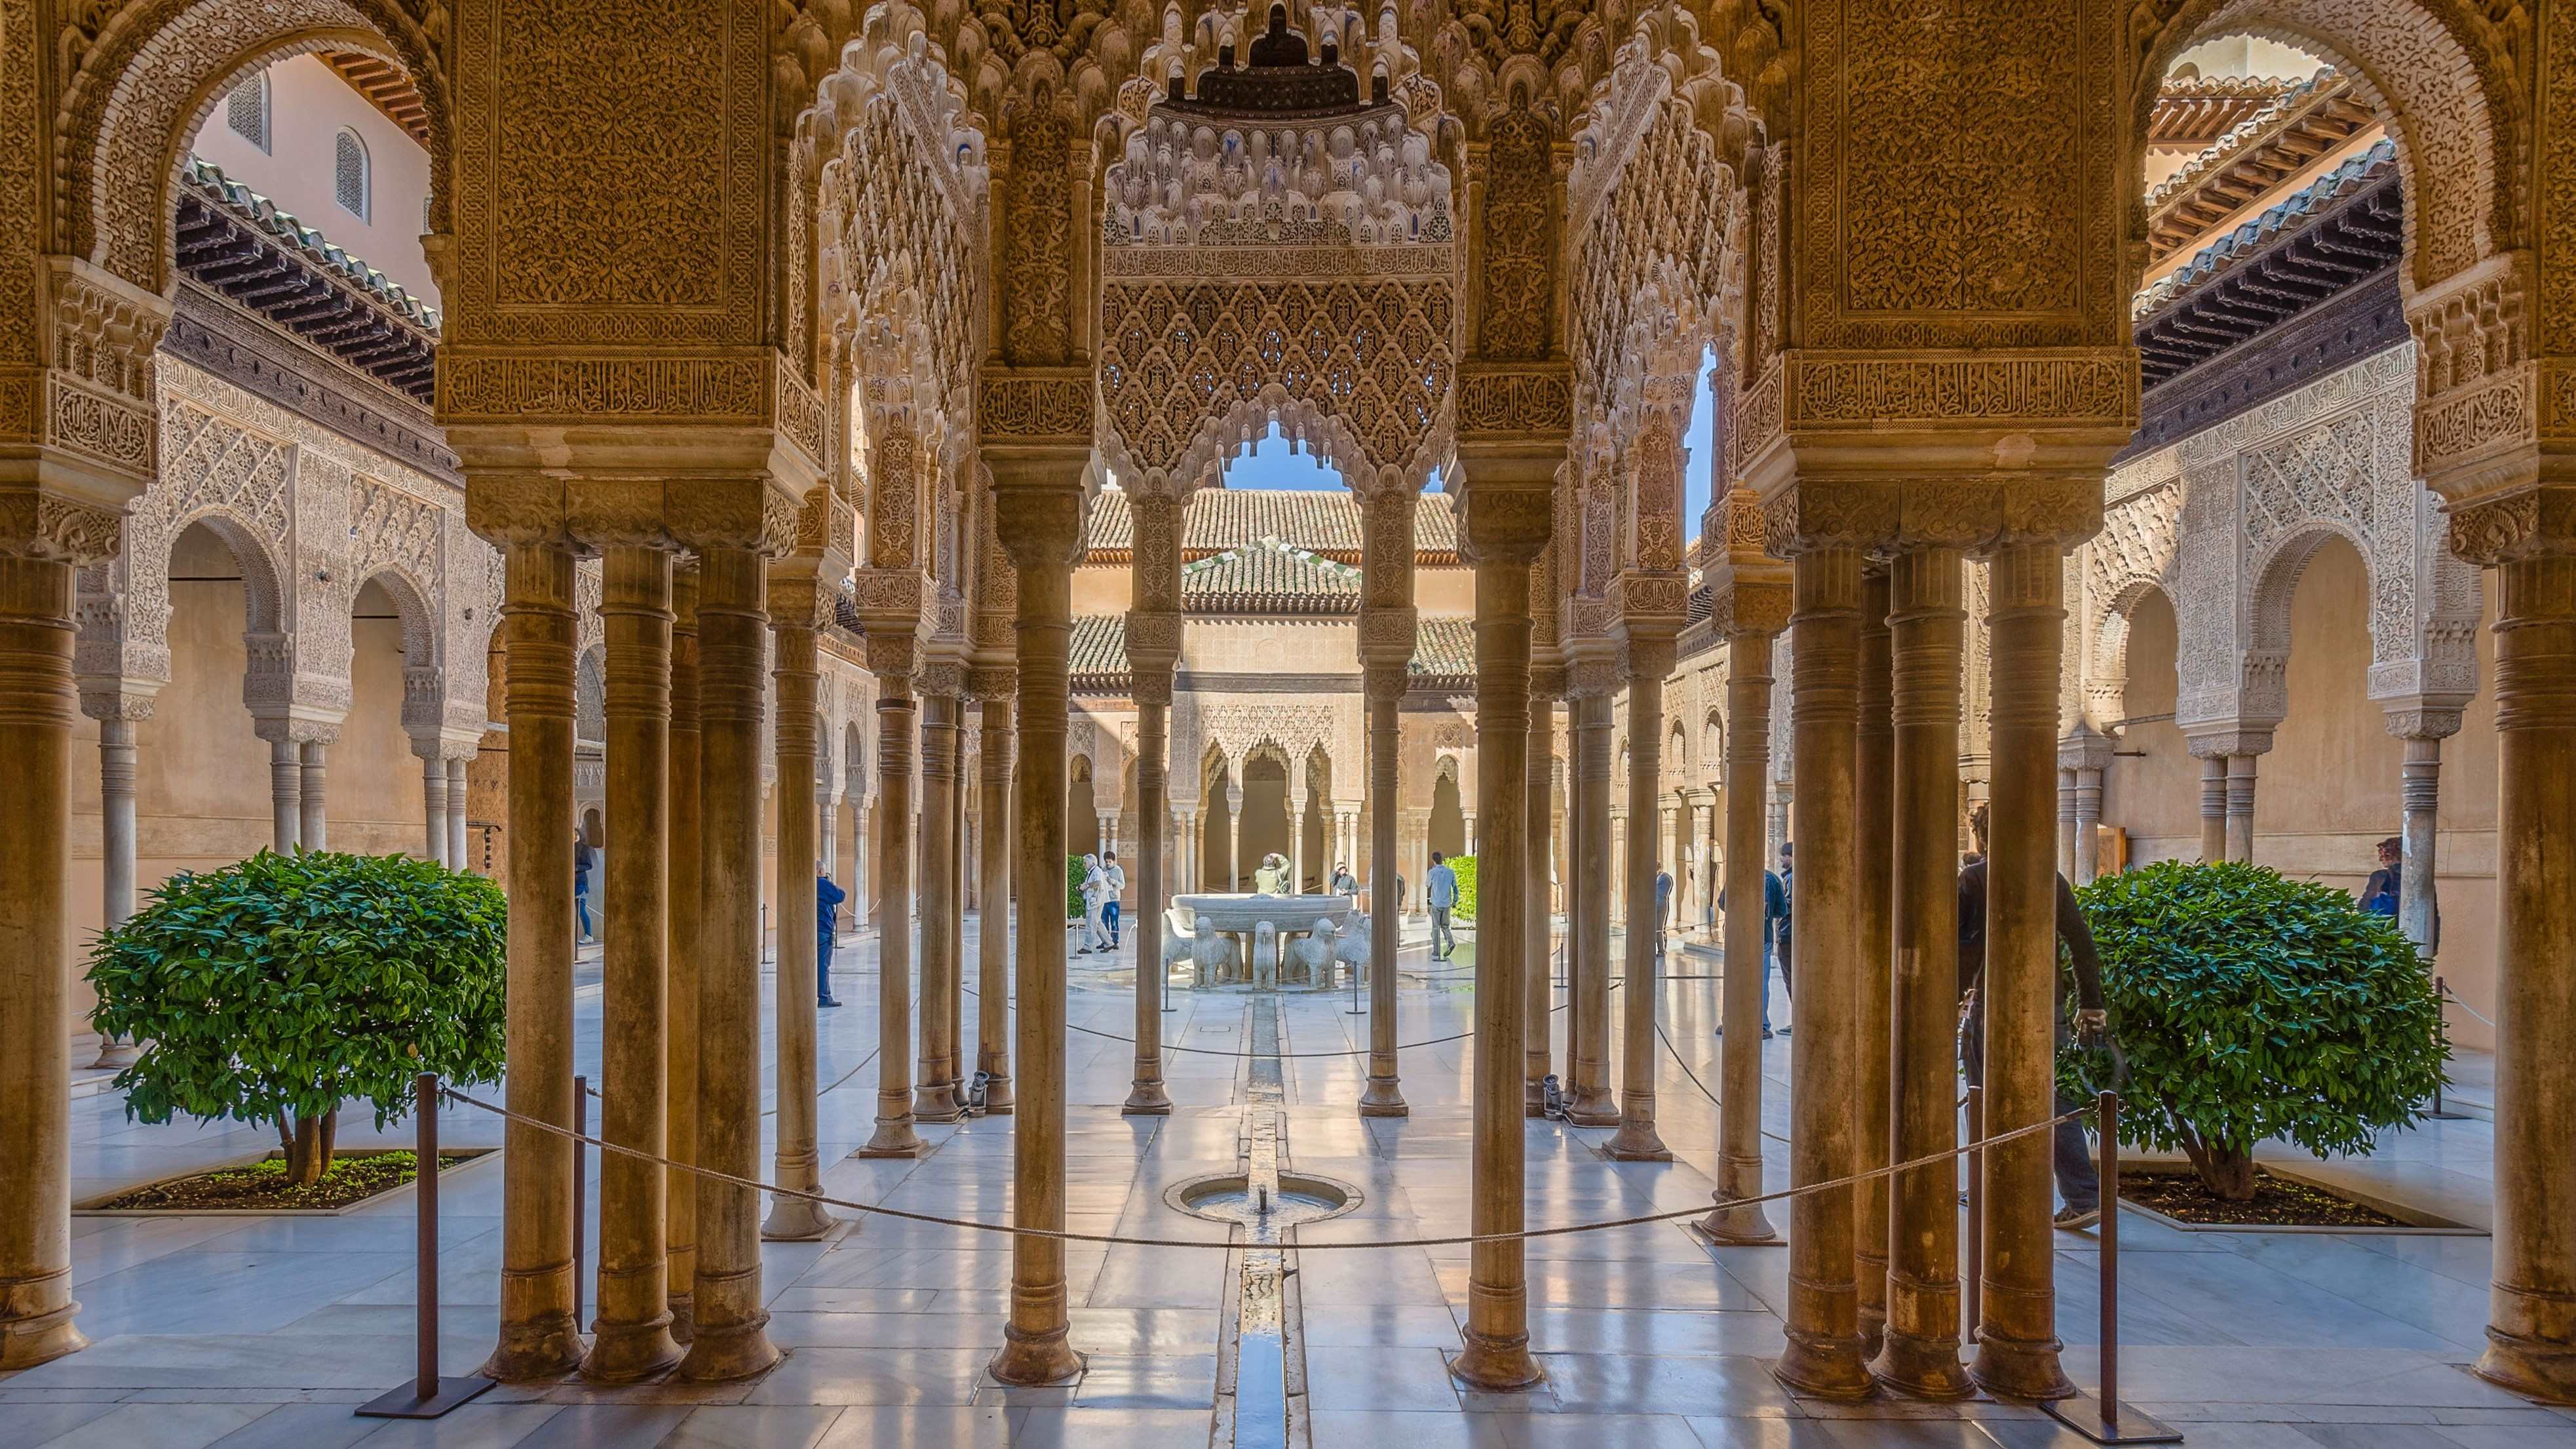 The Alhambra palace is one of the most famous remnants of Muslim rule in Andalusia (Wikimedia)